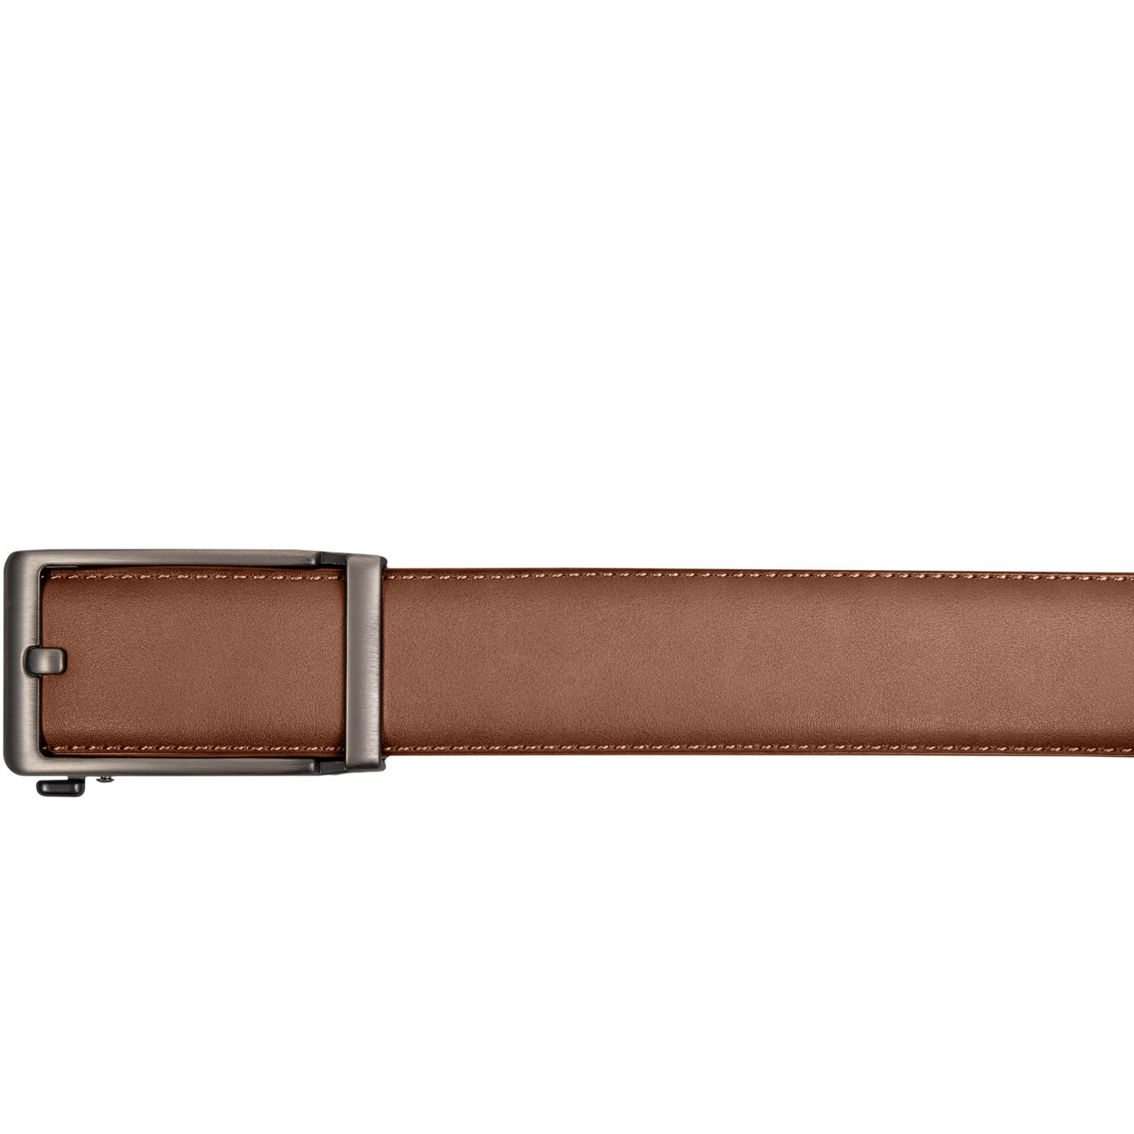 CHAMPS Men's Leather Automatic and Adjustable Belt, Brown - Image 3 of 5